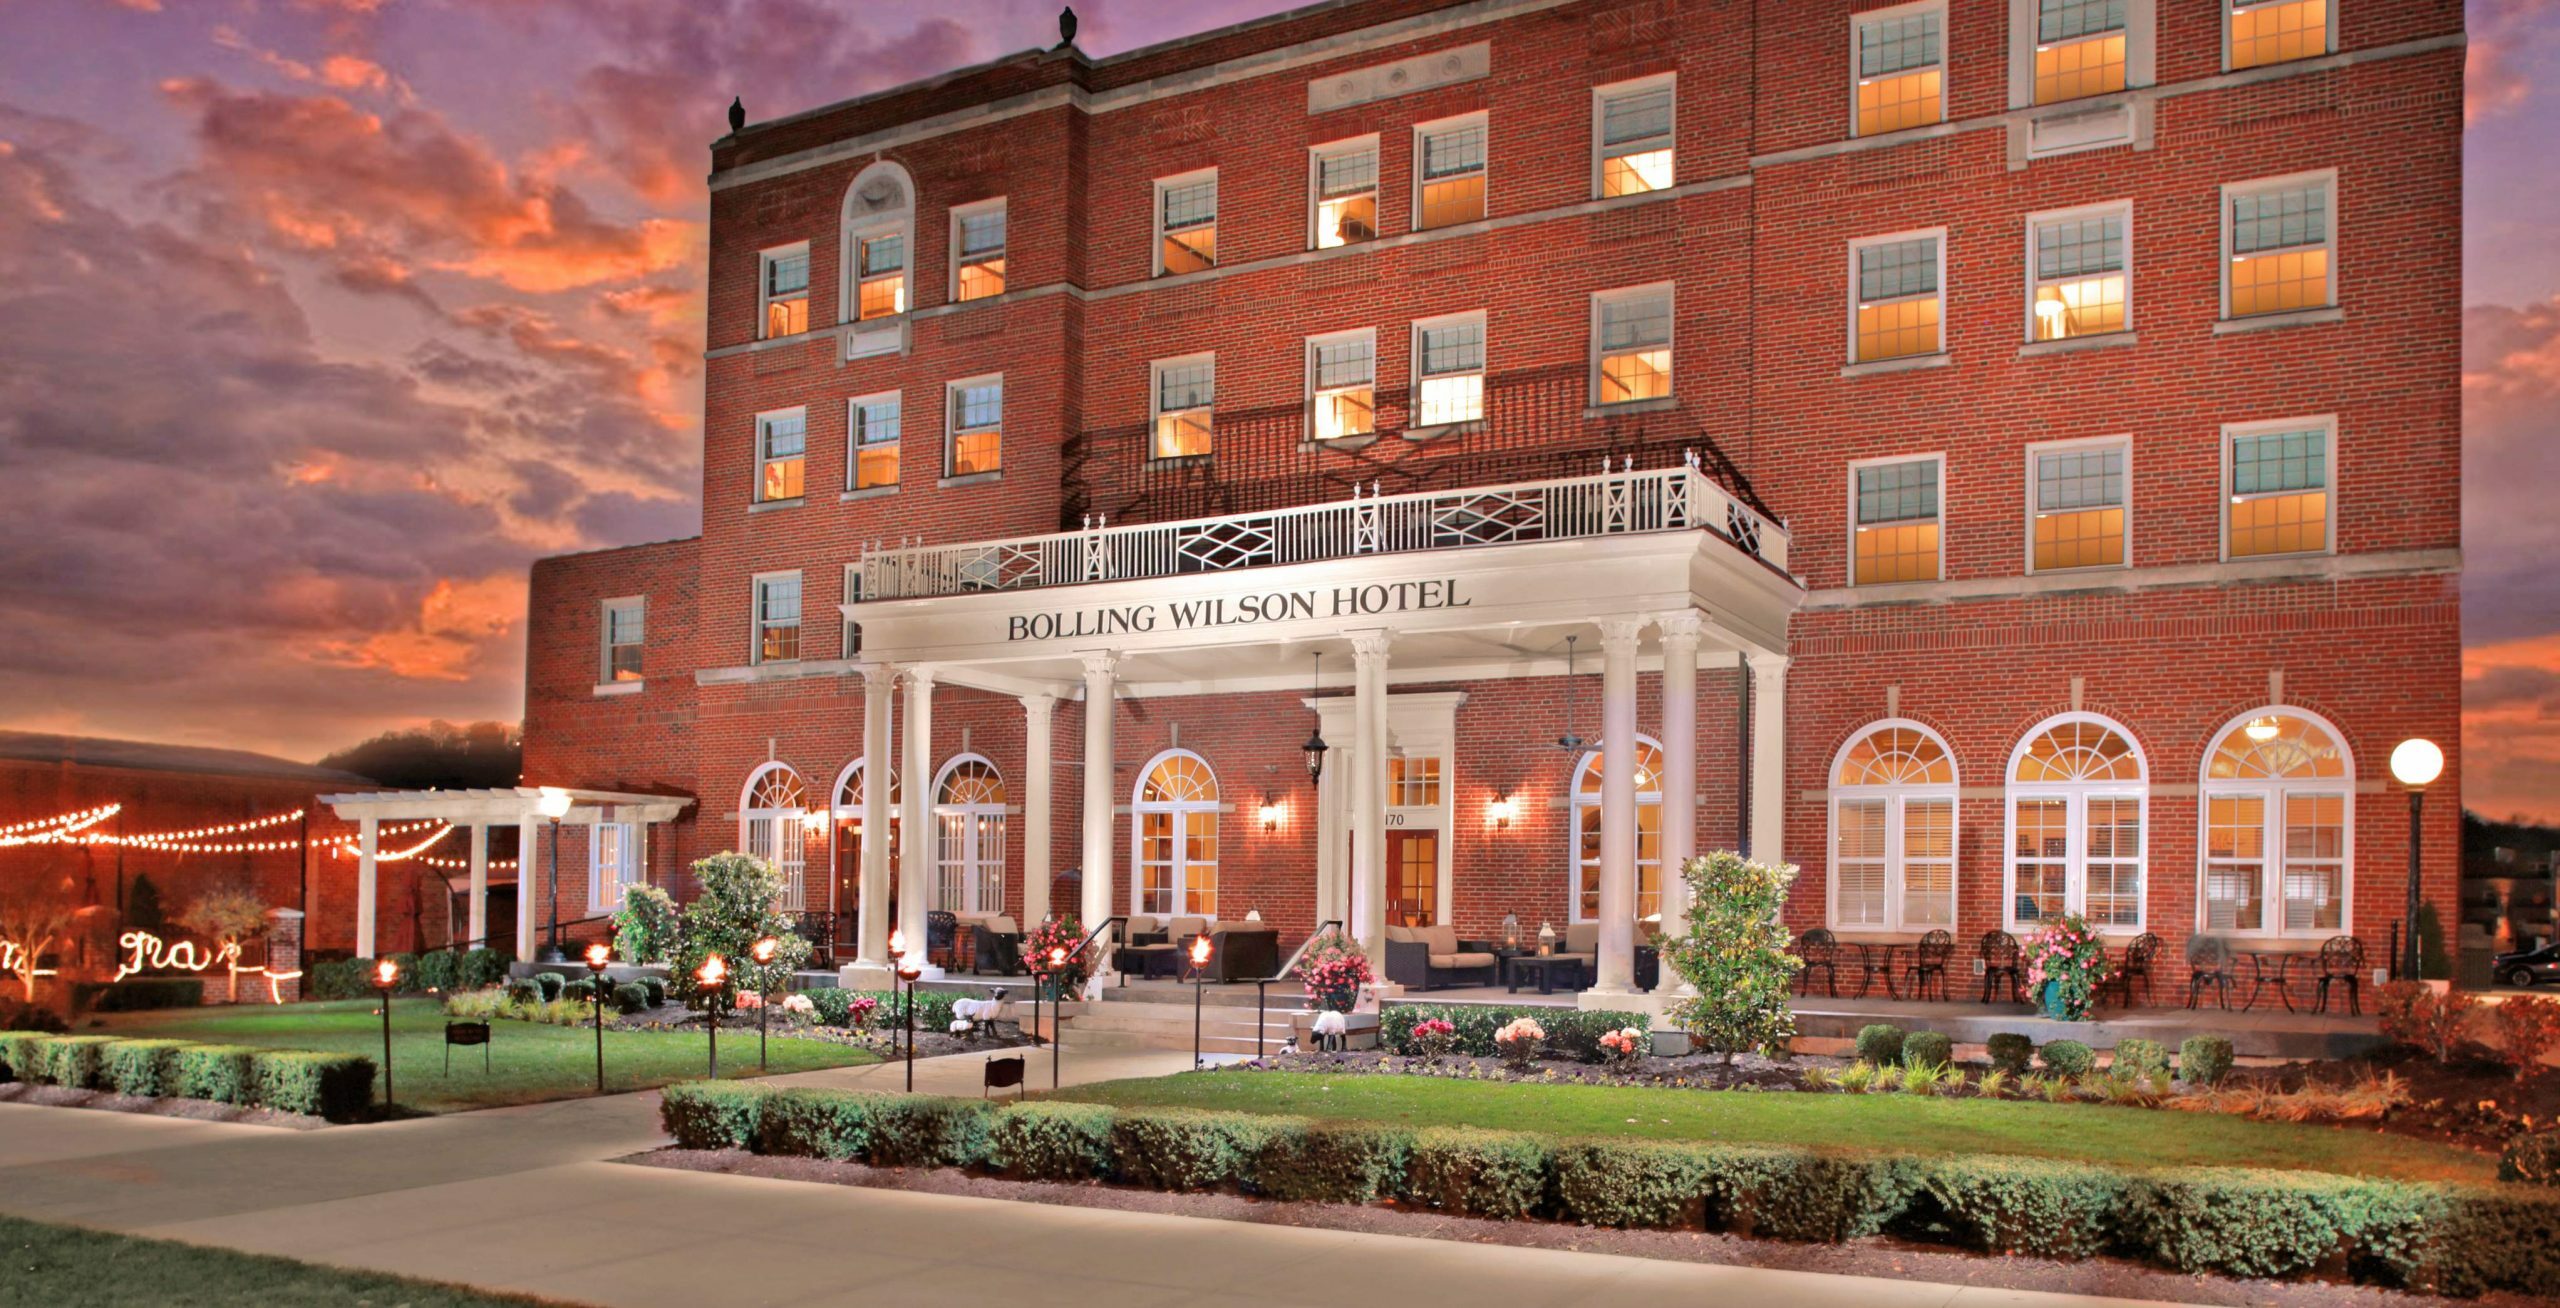 Photo of The Bolling Wilson Hotel, an Ascend Hotel, Wytheville, VA